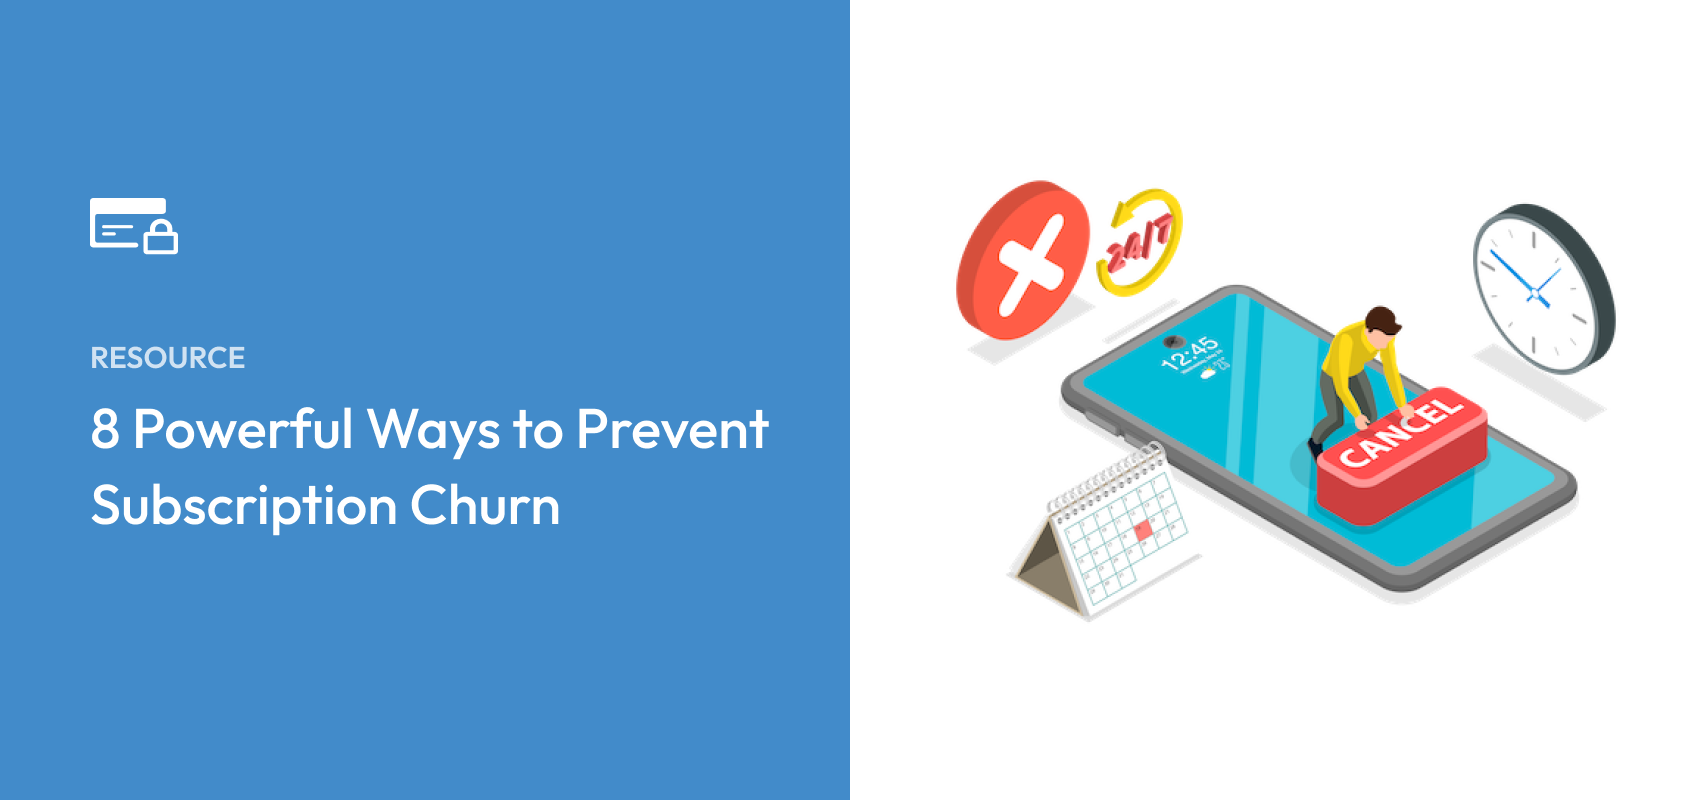 8 Powerful Ways to Prevent Subscription Churn